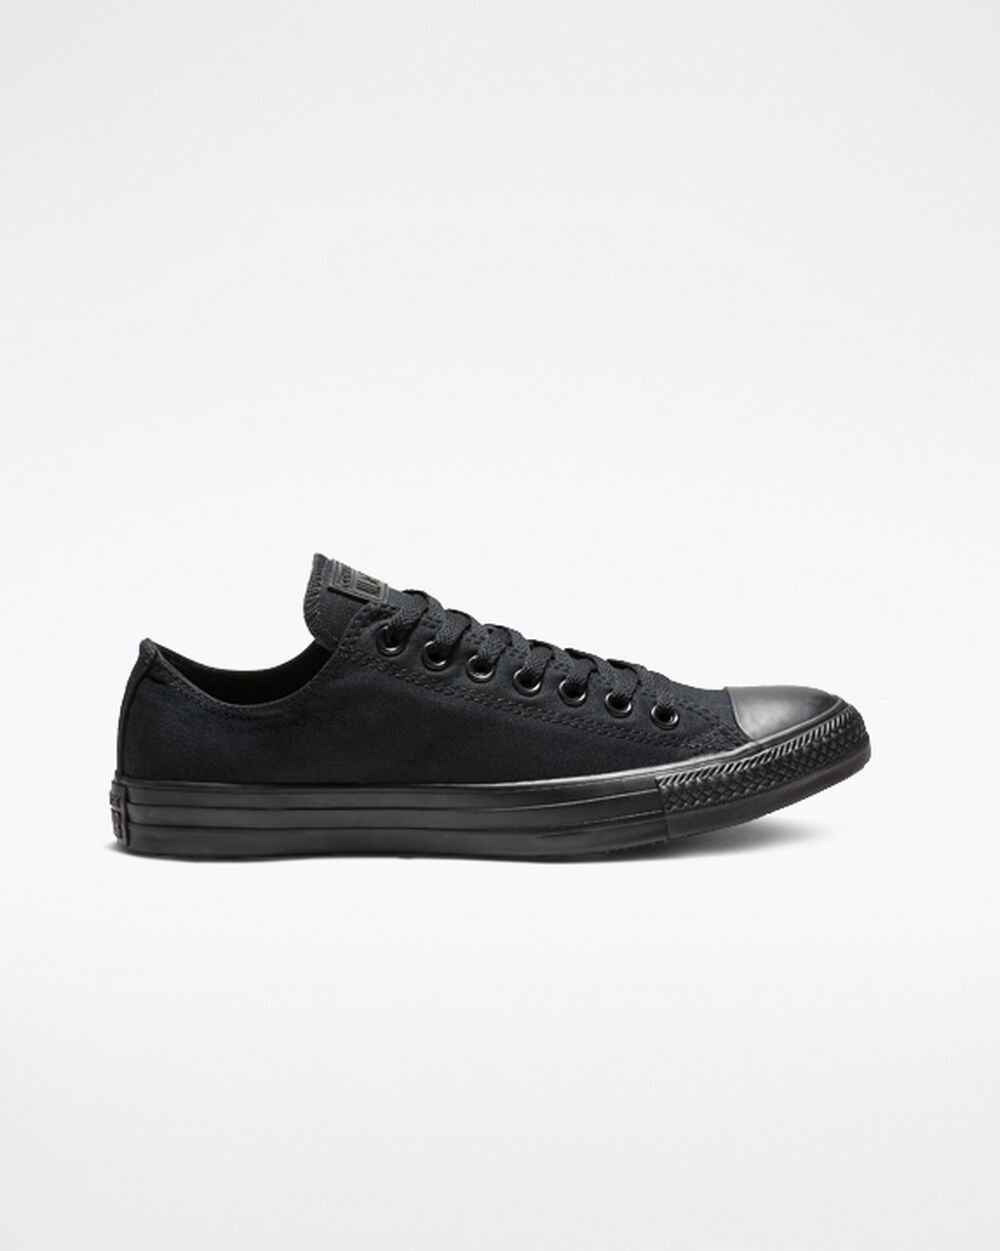 Tenis Converse Chuck Taylor All Star Mujer Negros | Mexico-526466